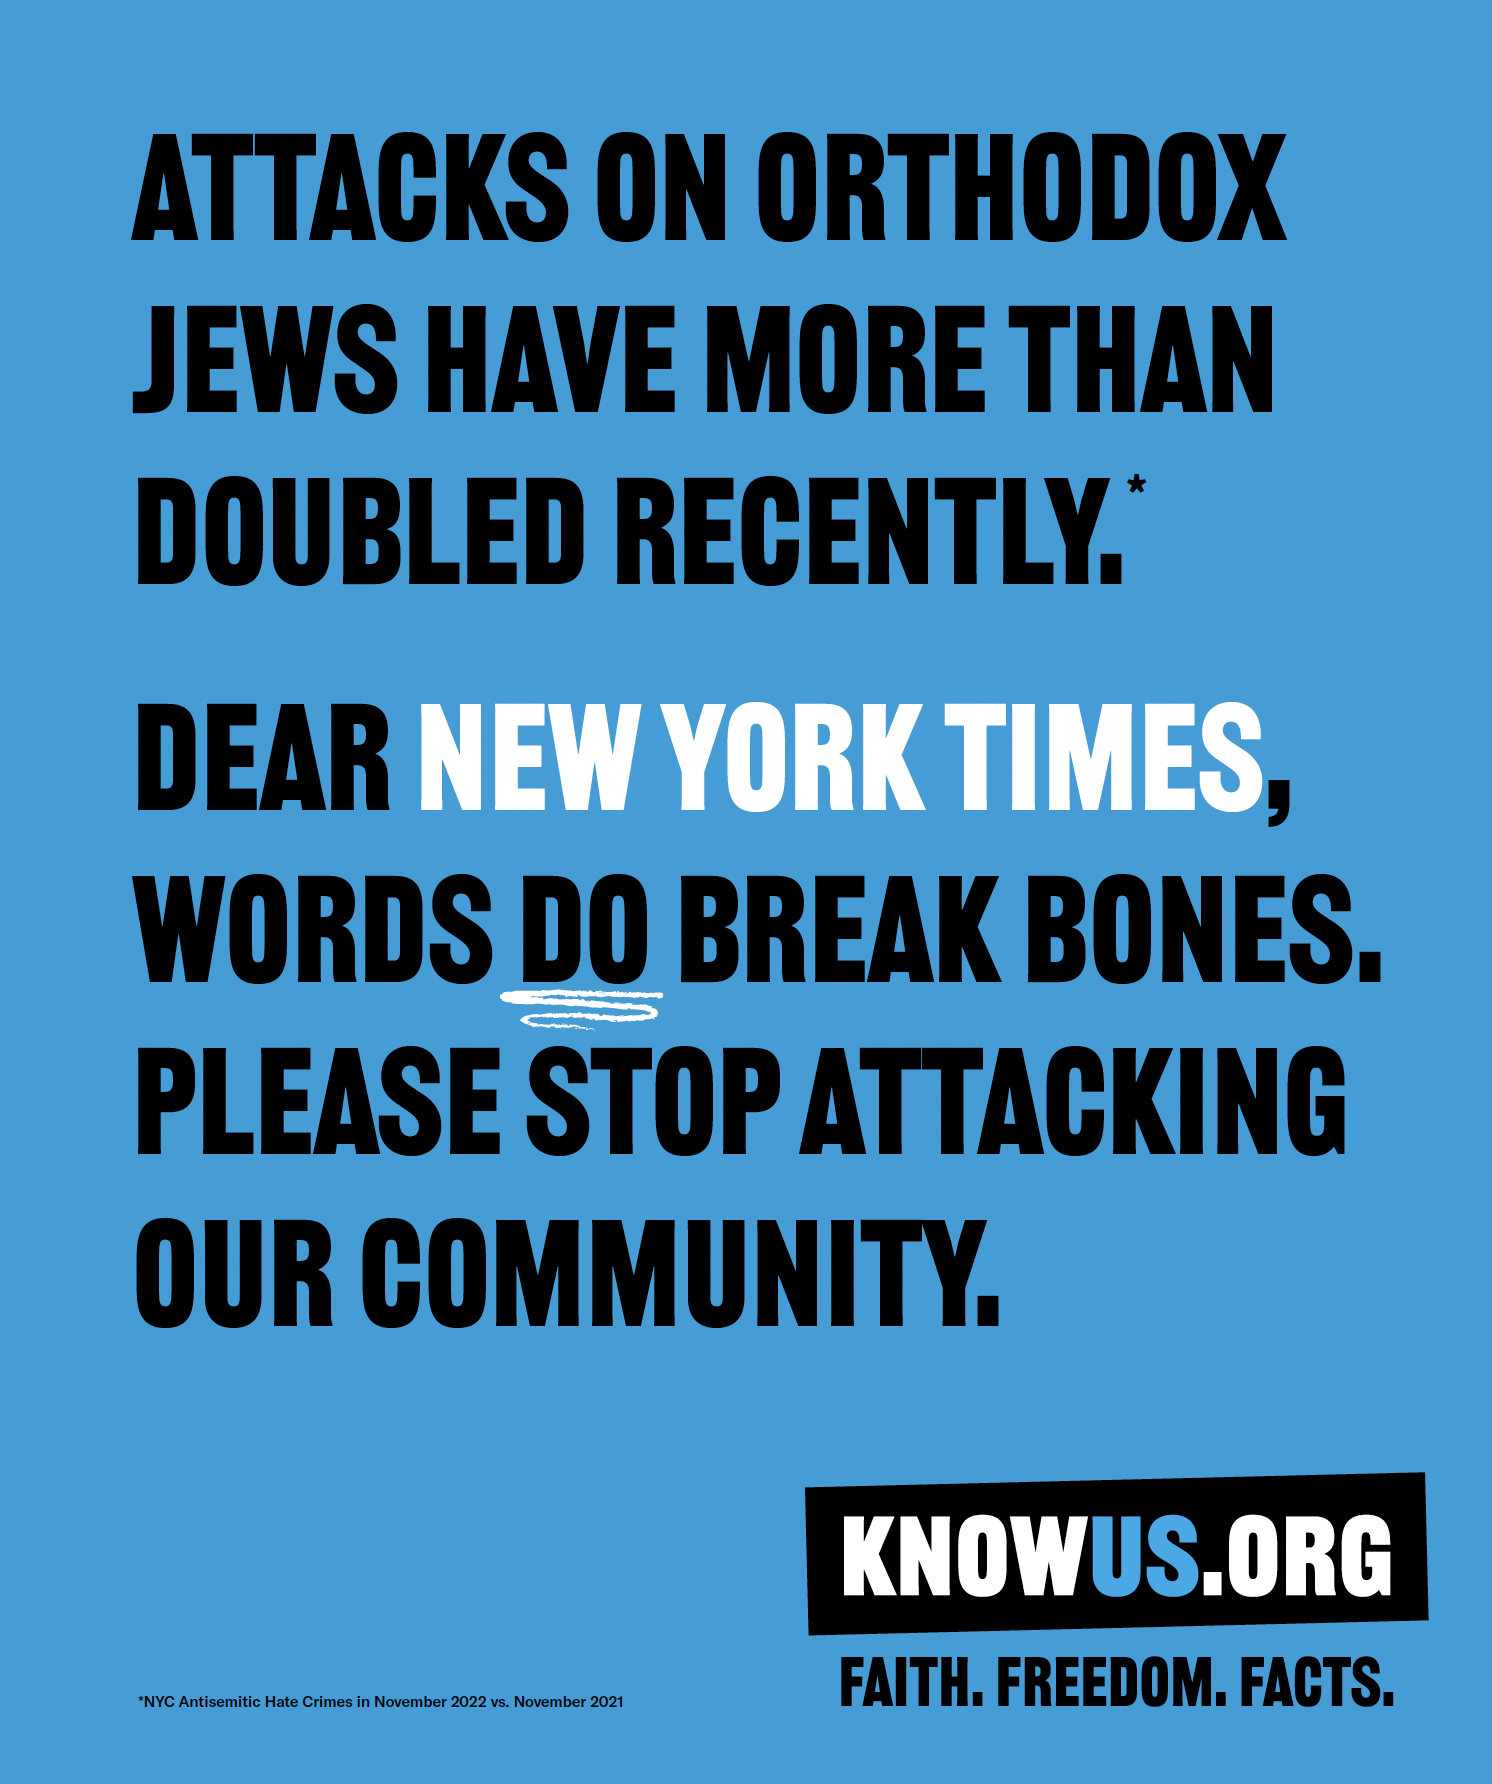 Attacks on Orthodox Jews have more than doubled recently. Dear New York Times, words do break bones. Please stop attacking our community.